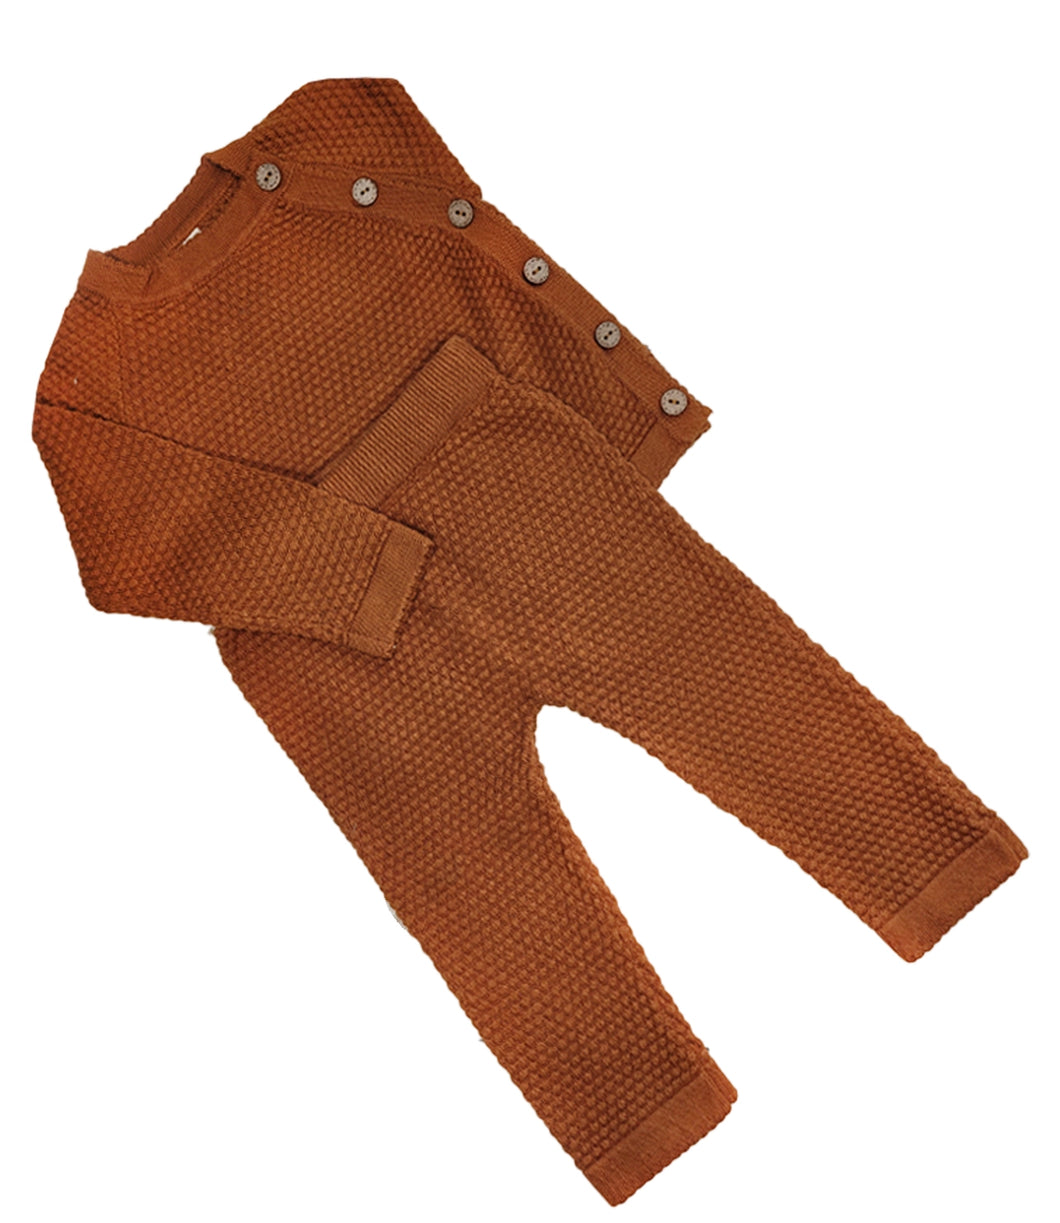 Noah Cotton Knit 2pc Shirt and pants Baby Outfit Set | Russet Brown